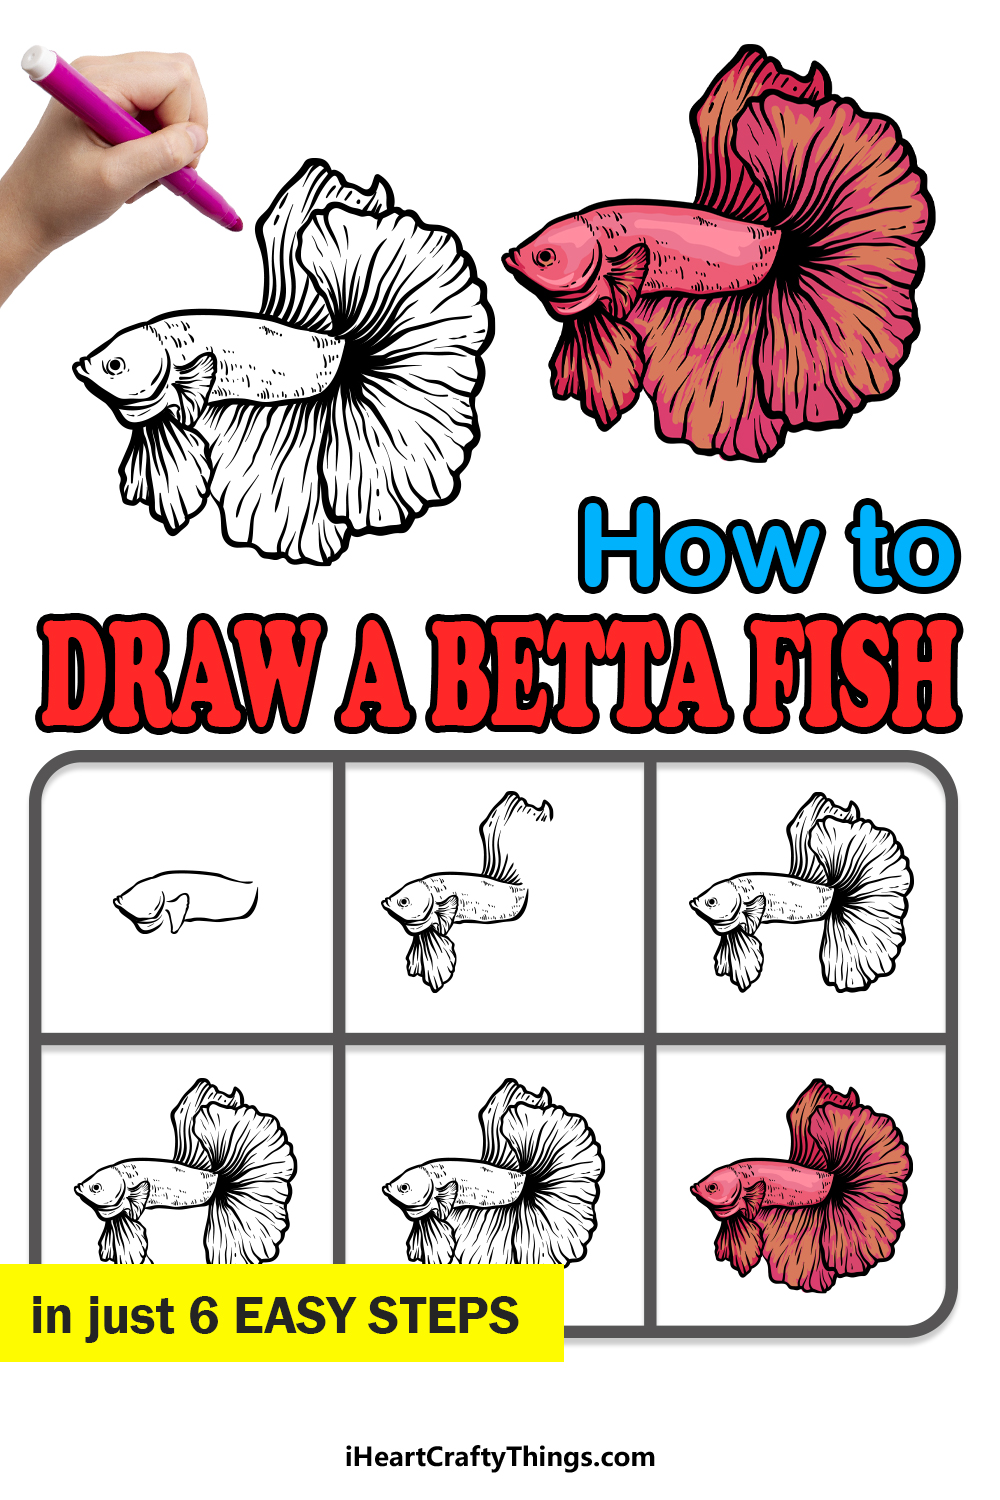 Betta Fish Sketch: How to Draw Your Own Betta Fish 2